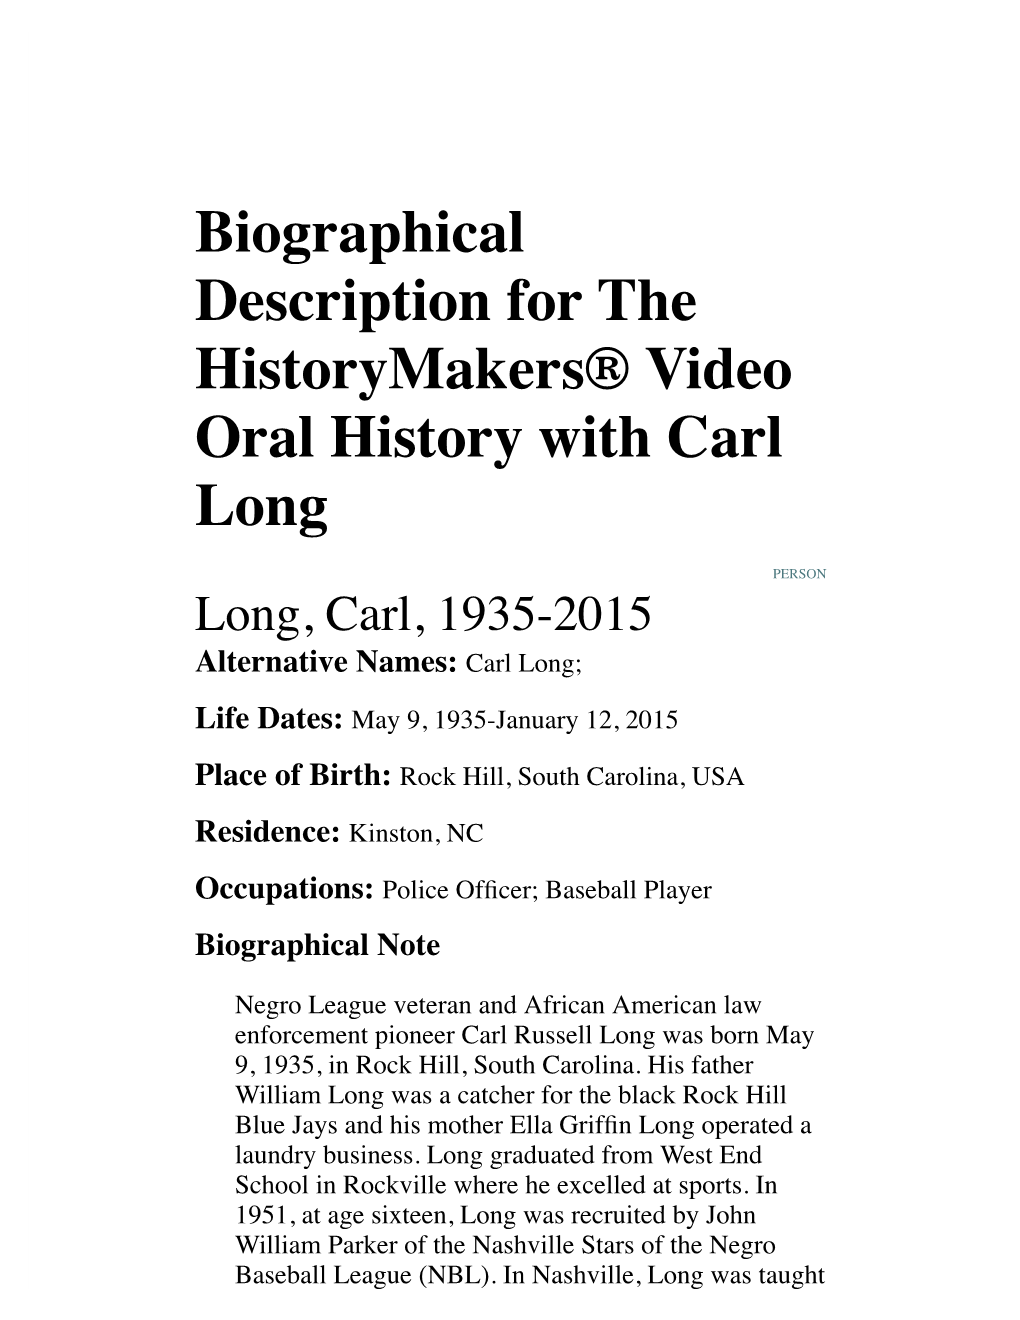 Biographical Description for the Historymakers® Video Oral History with Carl Long